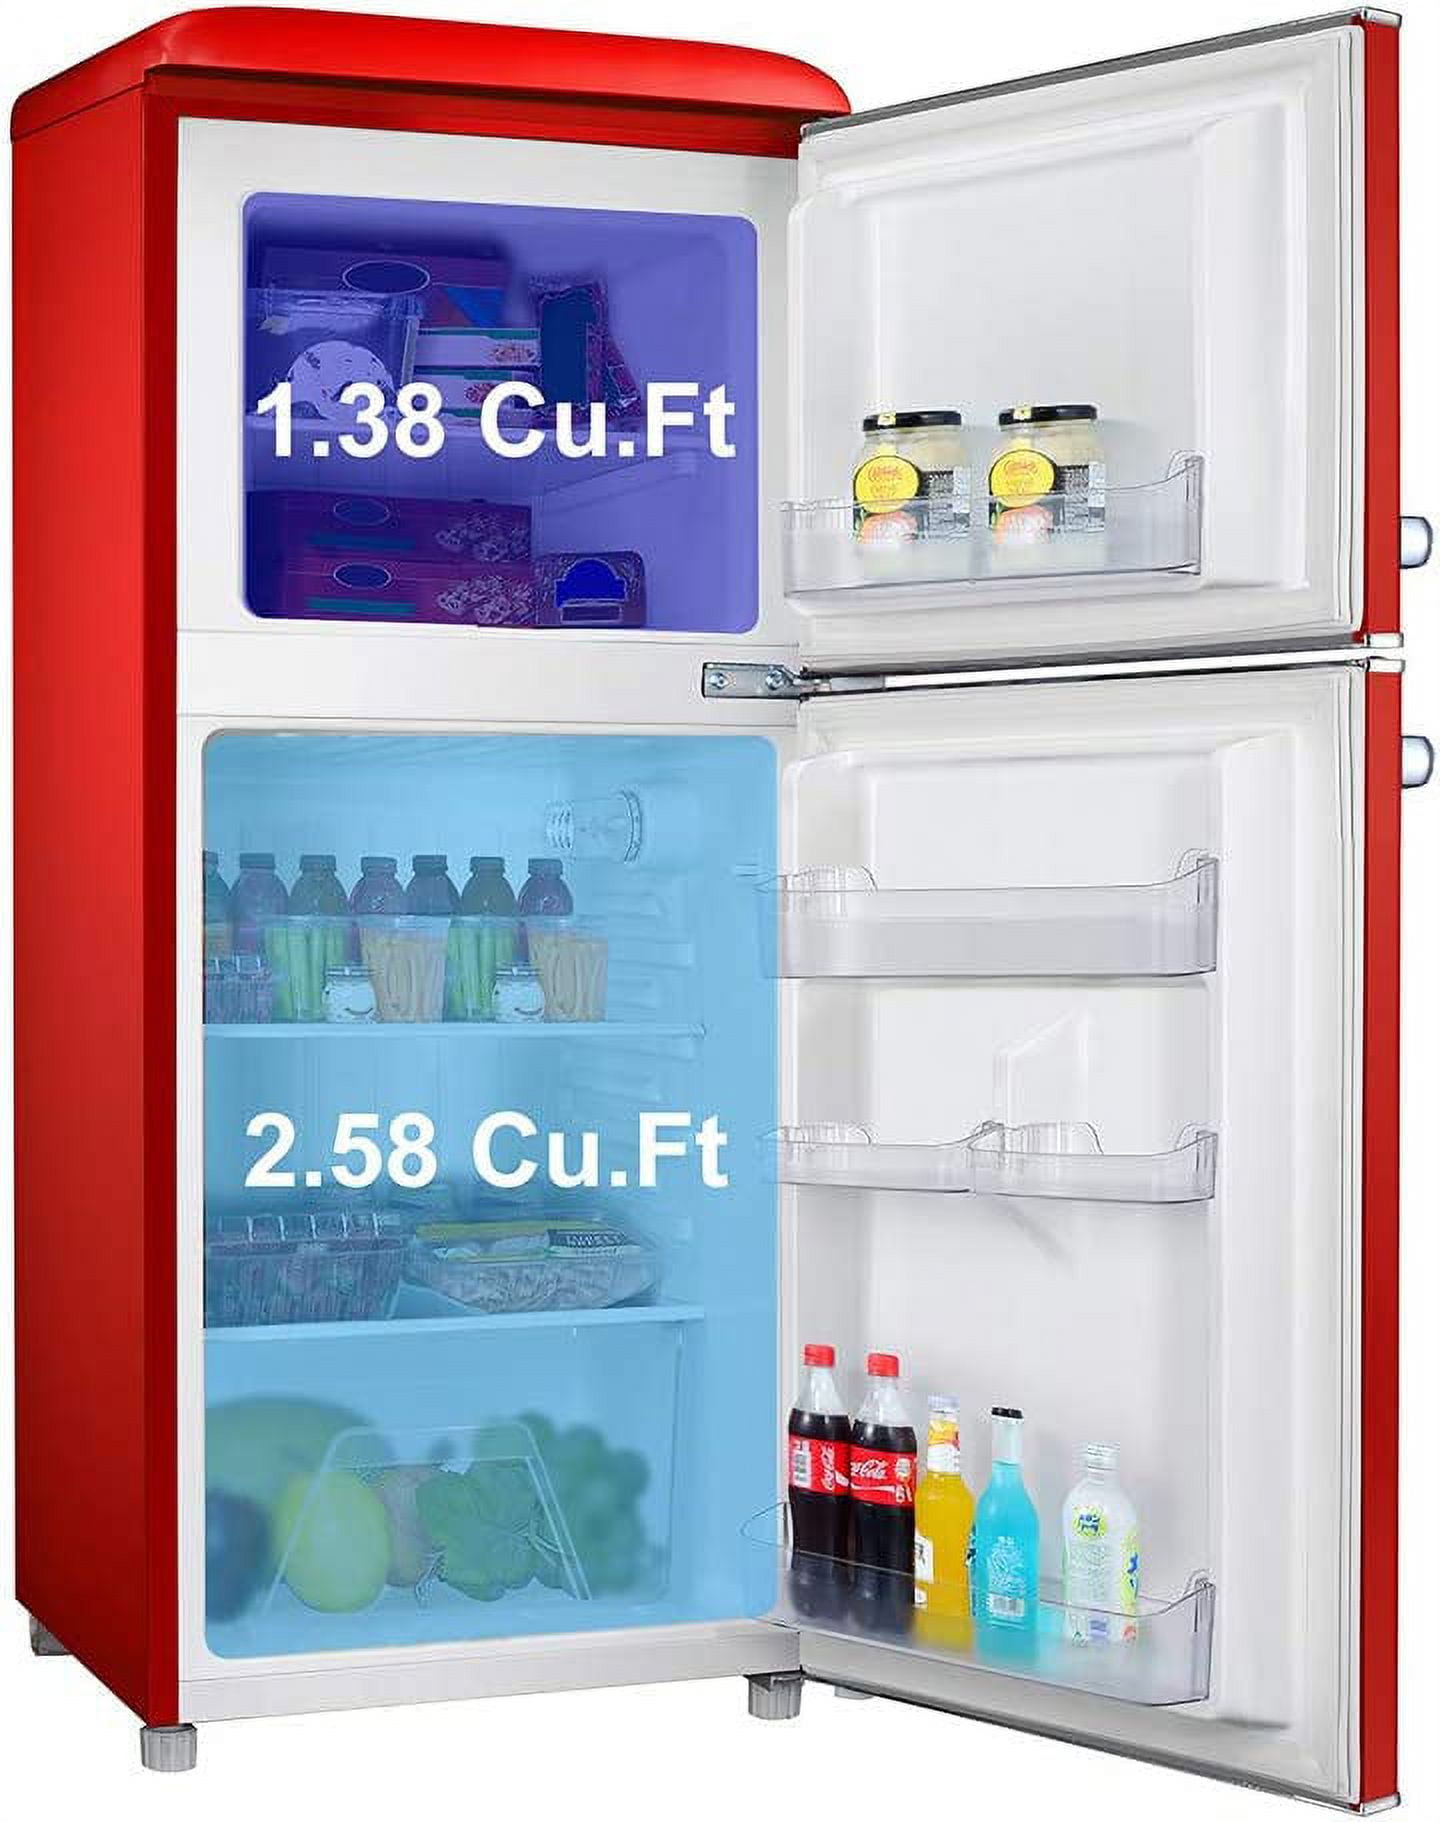 Galanz GLR25MBER10 Retro Compact Refrigerator, Mini Fridge with Single  Doors, Adjustable Mechanical Thermostat with Chiller, Blue, 2.5 Cu Ft